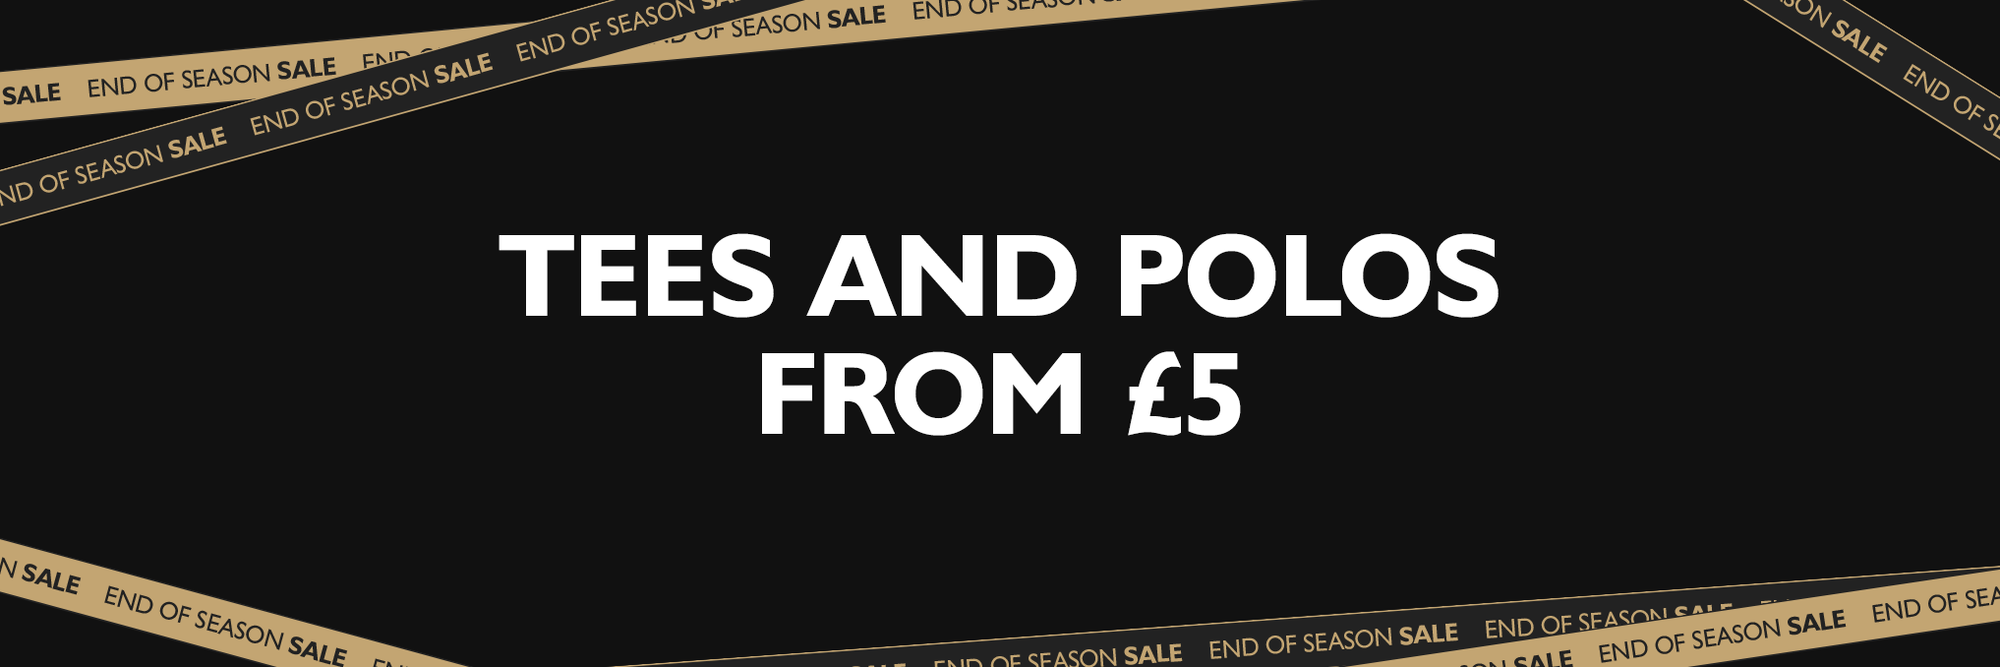 23/24 End of Season Sale - Tees and Polos from £5